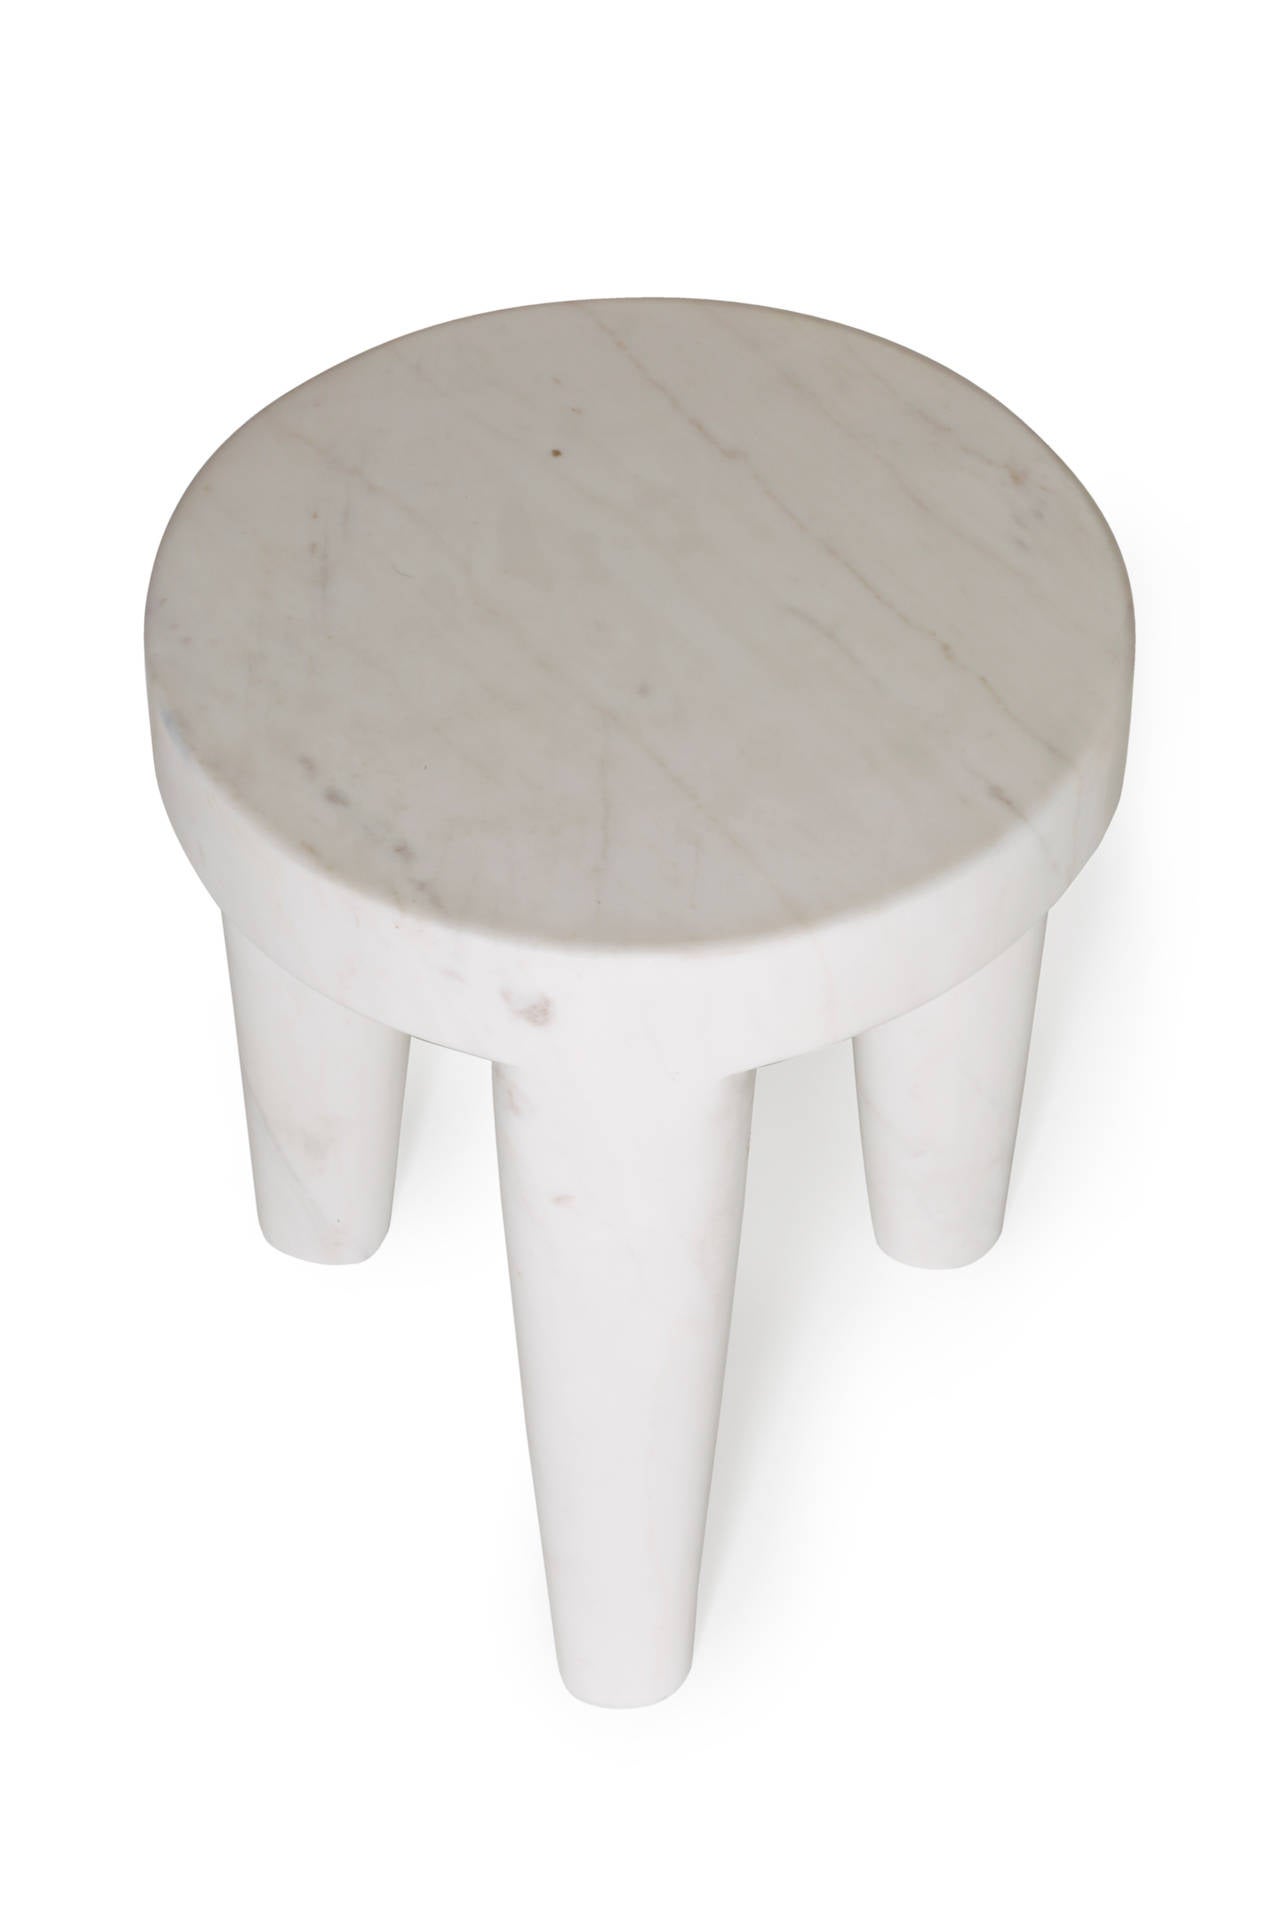 American Large Tribute Stool in Calacatta Marble